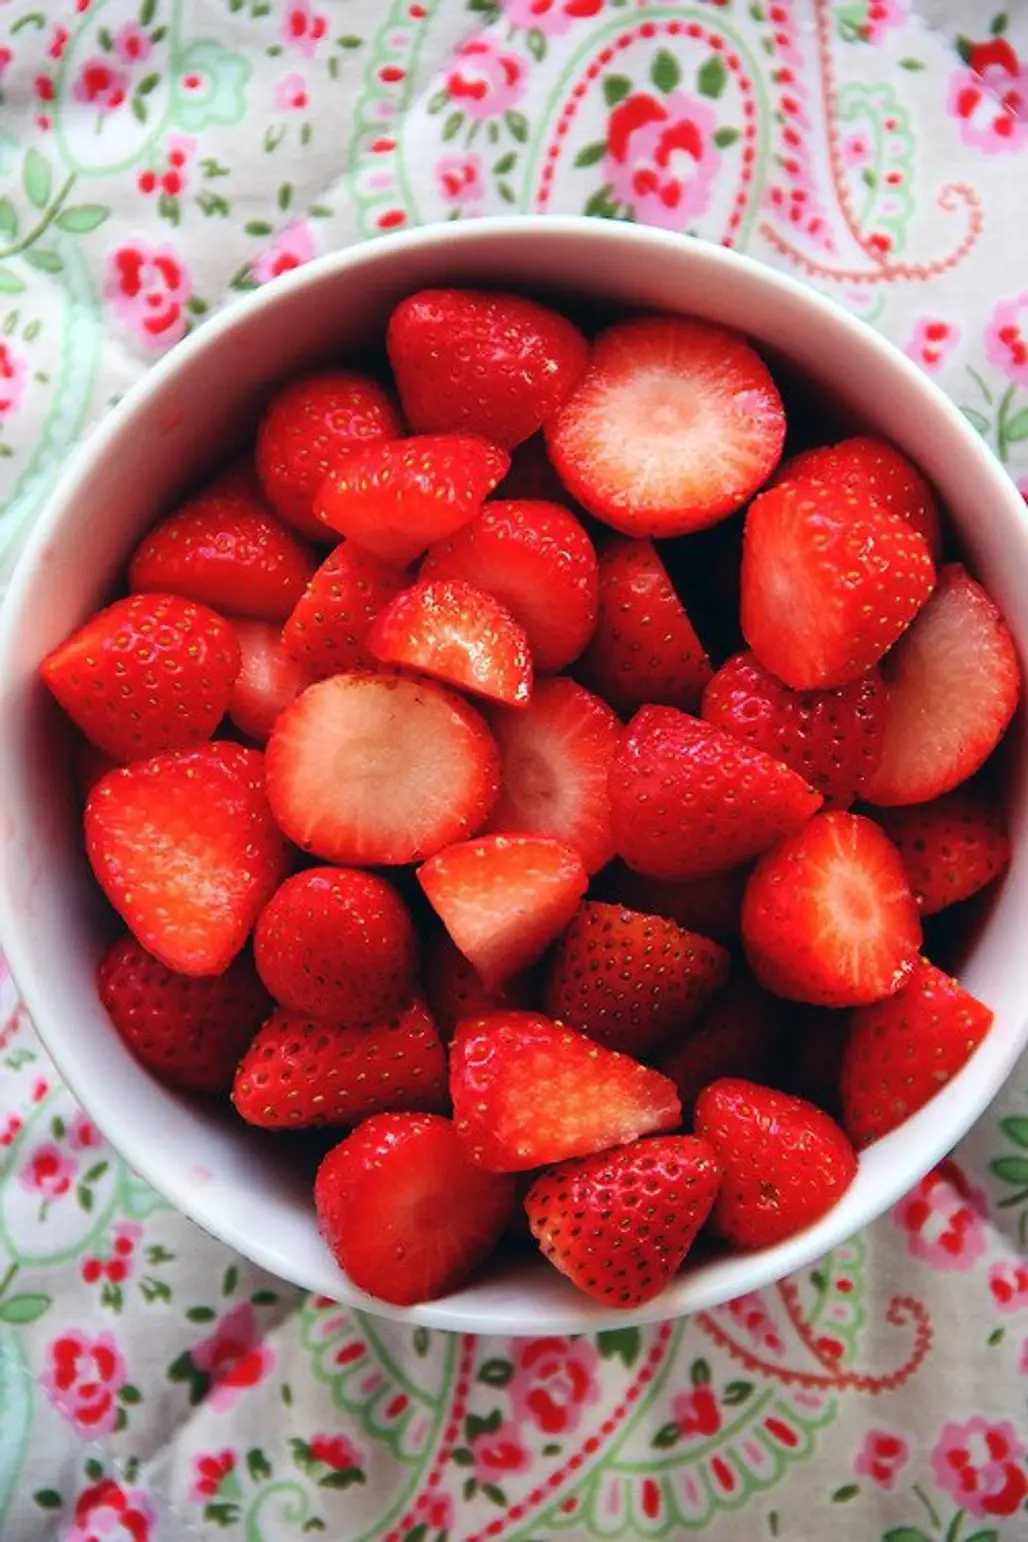 Nibble on a Fat, Juicy Strawberry (or a Whole Bowl Full)